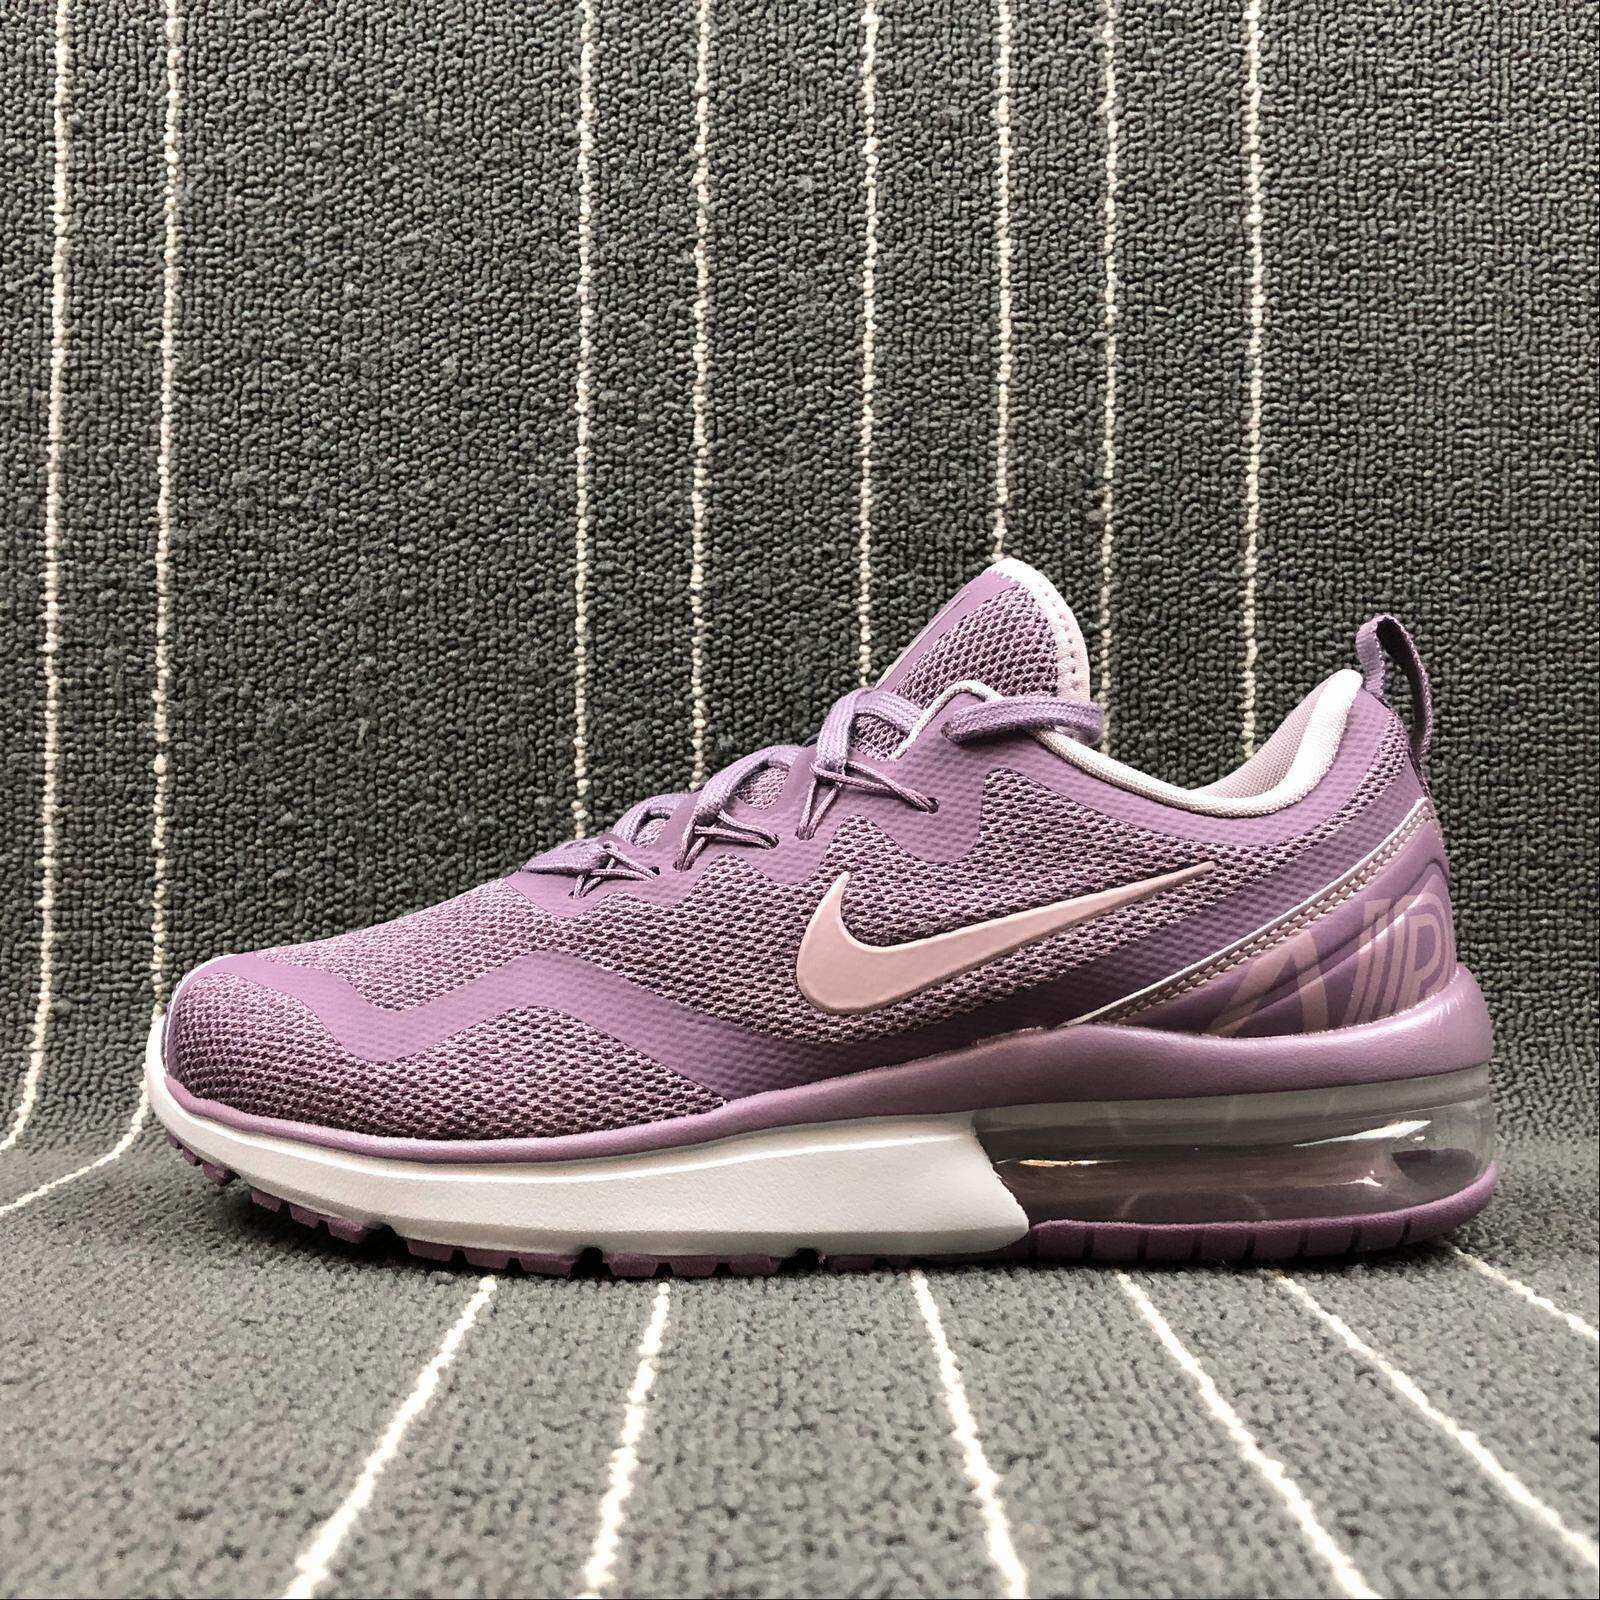 air max nike shoes for women, OFF 70 